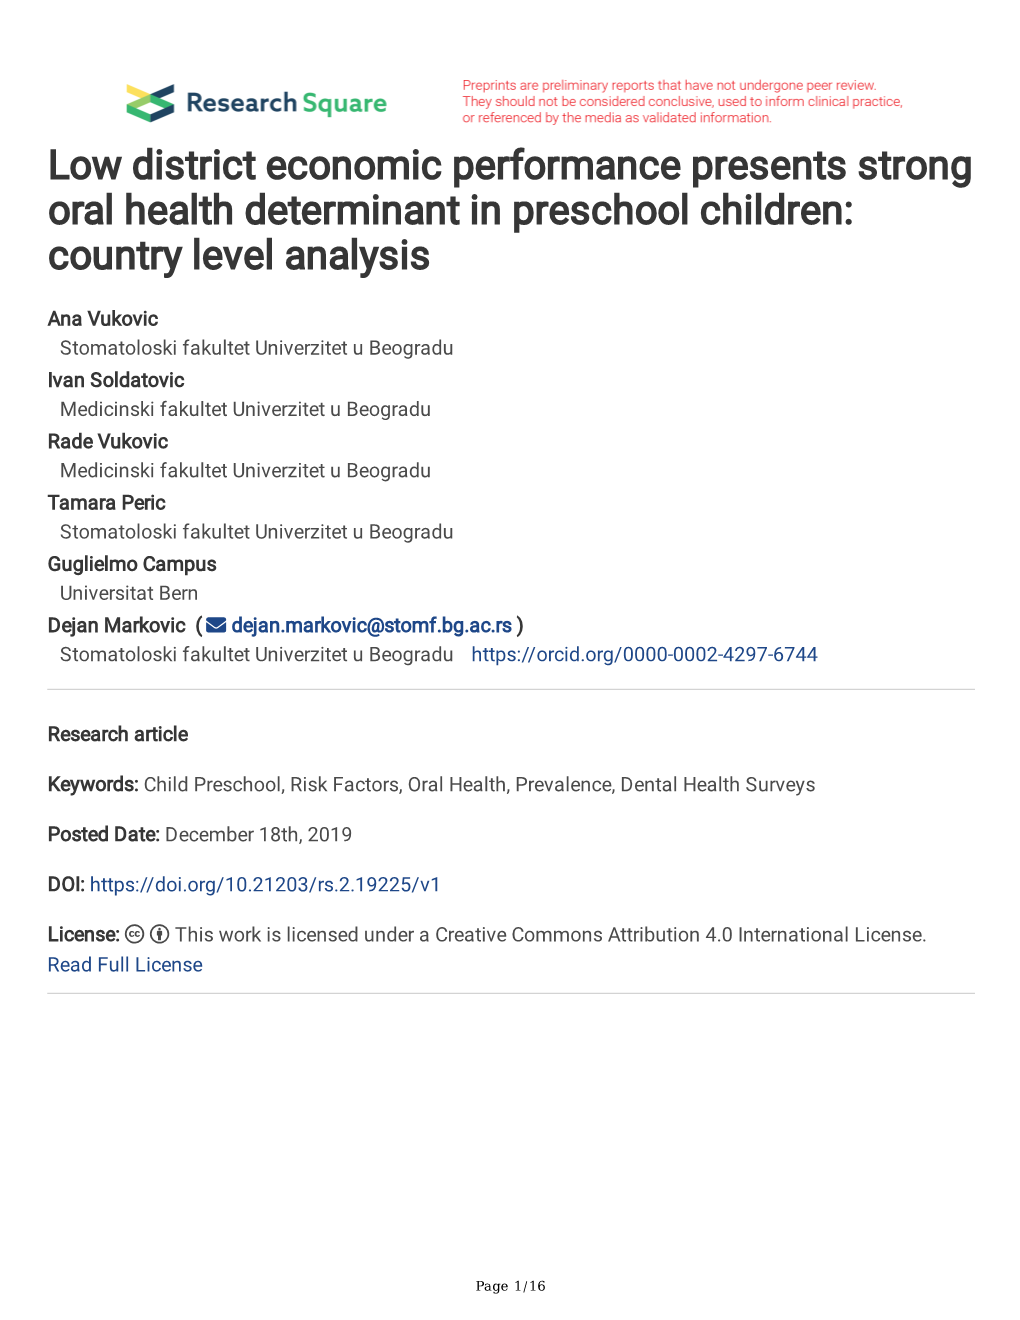 Low District Economic Performance Presents Strong Oral Health Determinant in Preschool Children: Country Level Analysis